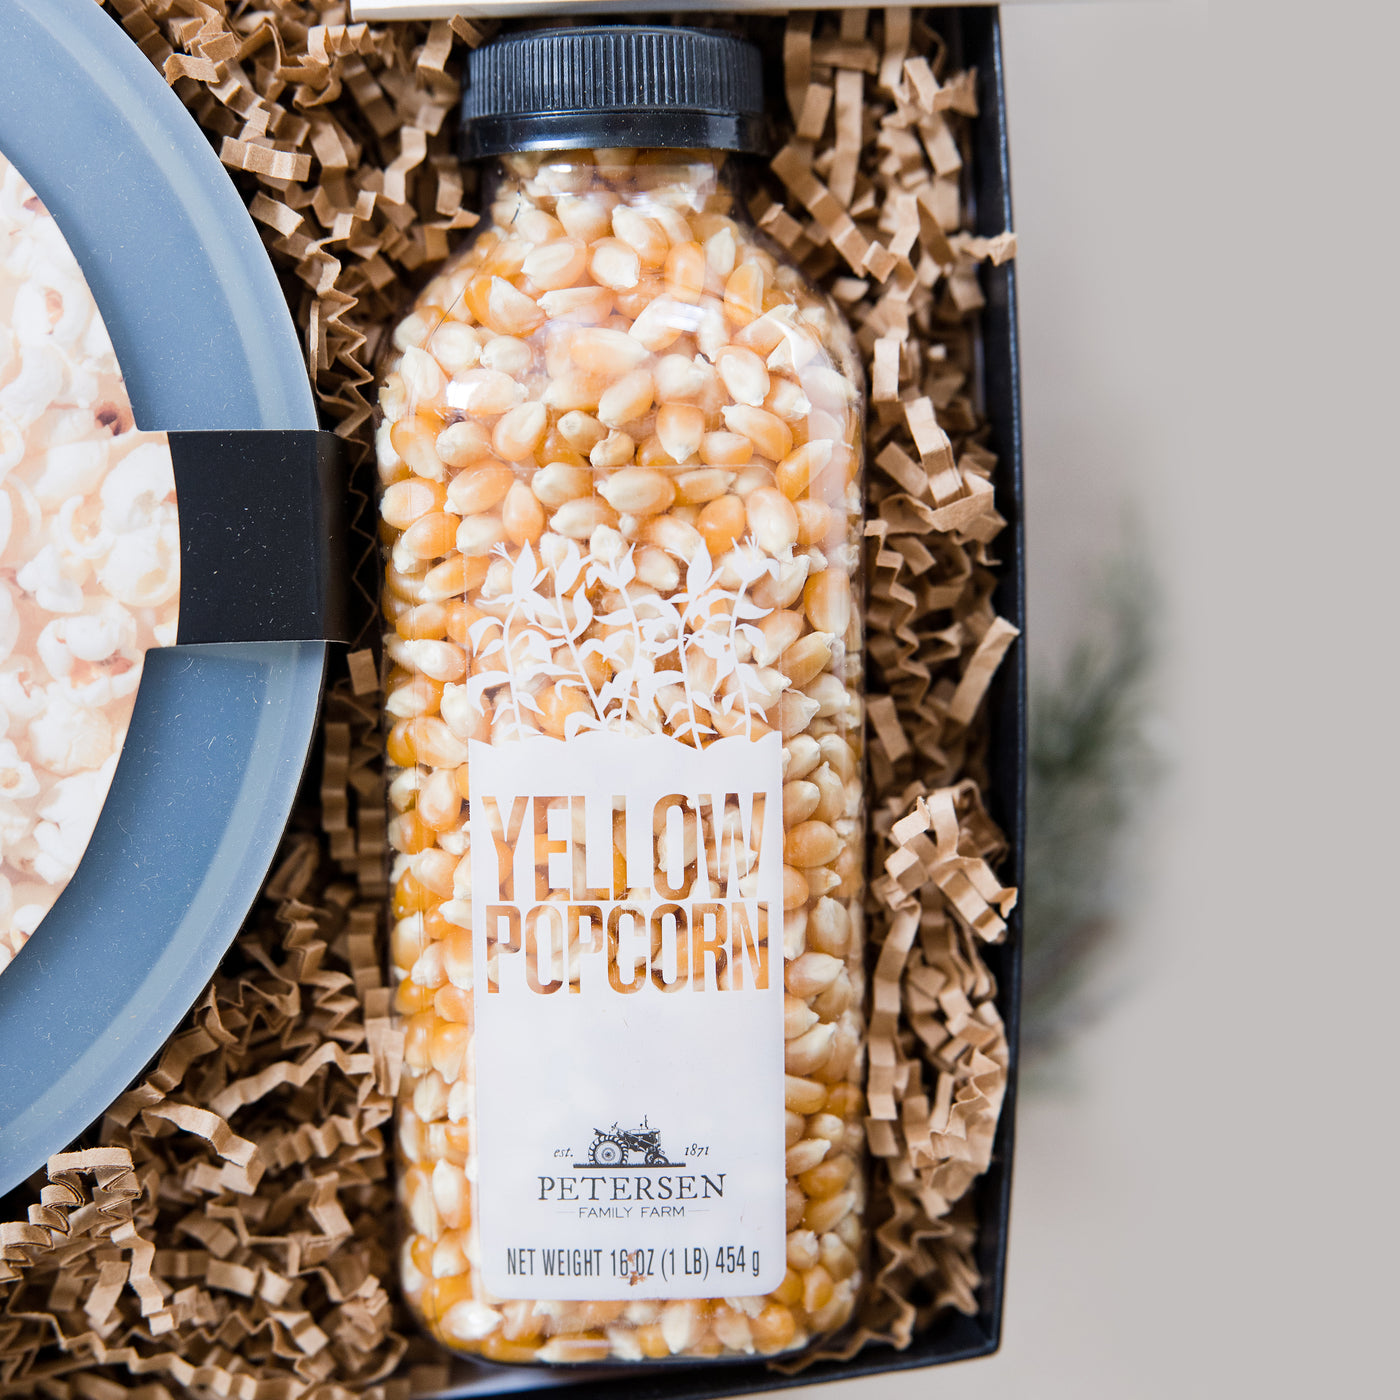 A clever and playful gift to help foster connection at home. This gift box includes all the makings of an amazing game night! Close up of Farm Fresh Yellow Bottled Popcorn